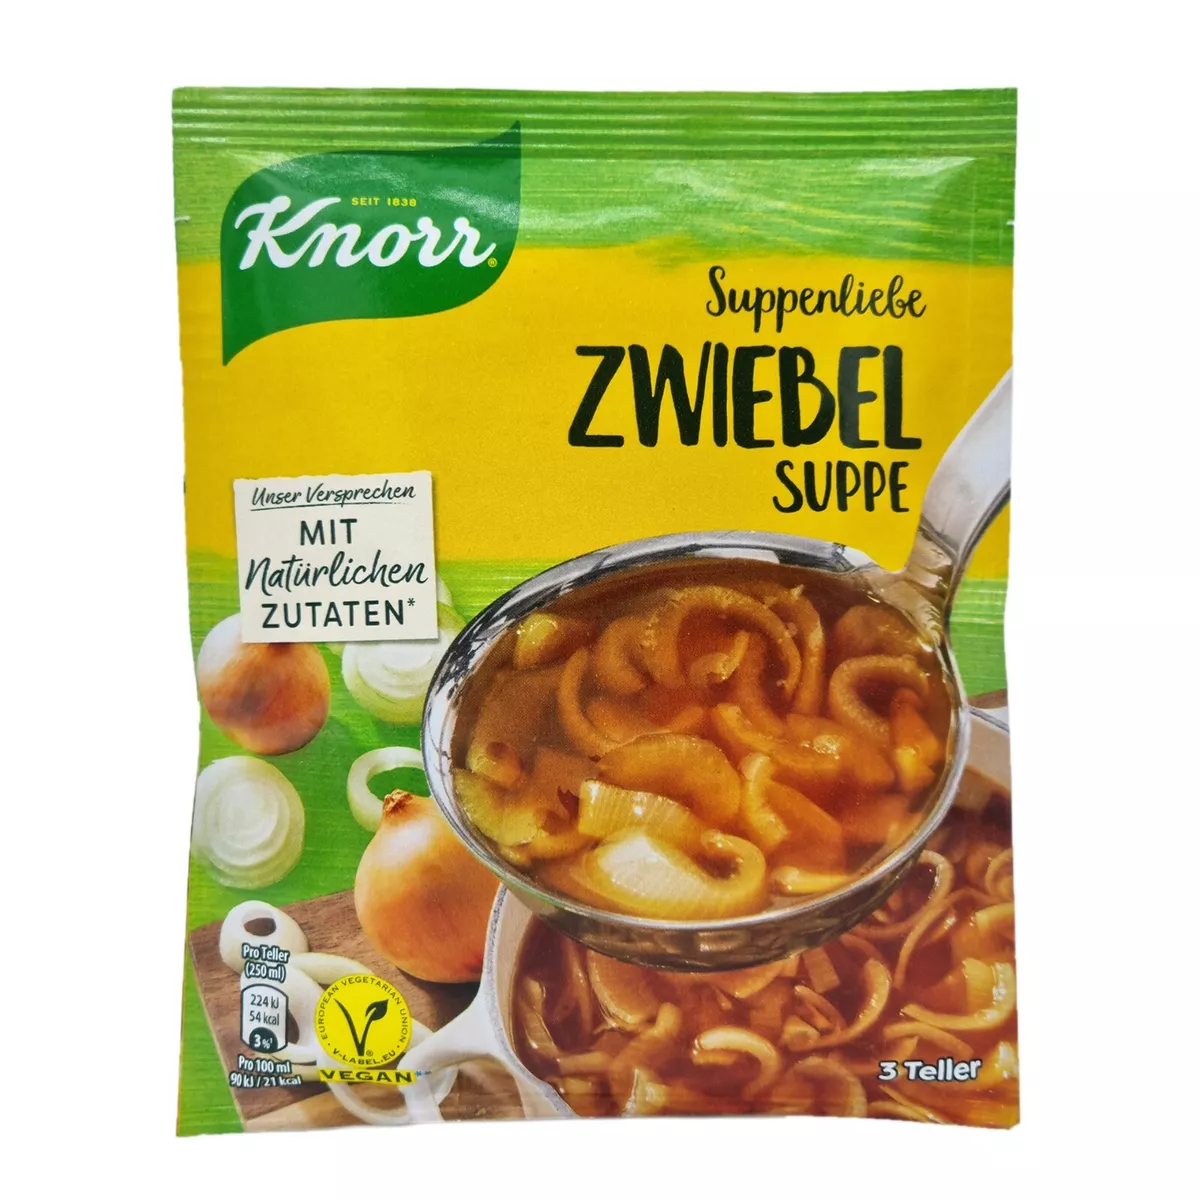 ✈TRACKED onion soup Knorr SHIPPING eBay Zwiebel Suppe 🍲 Suppenliebe 8x |